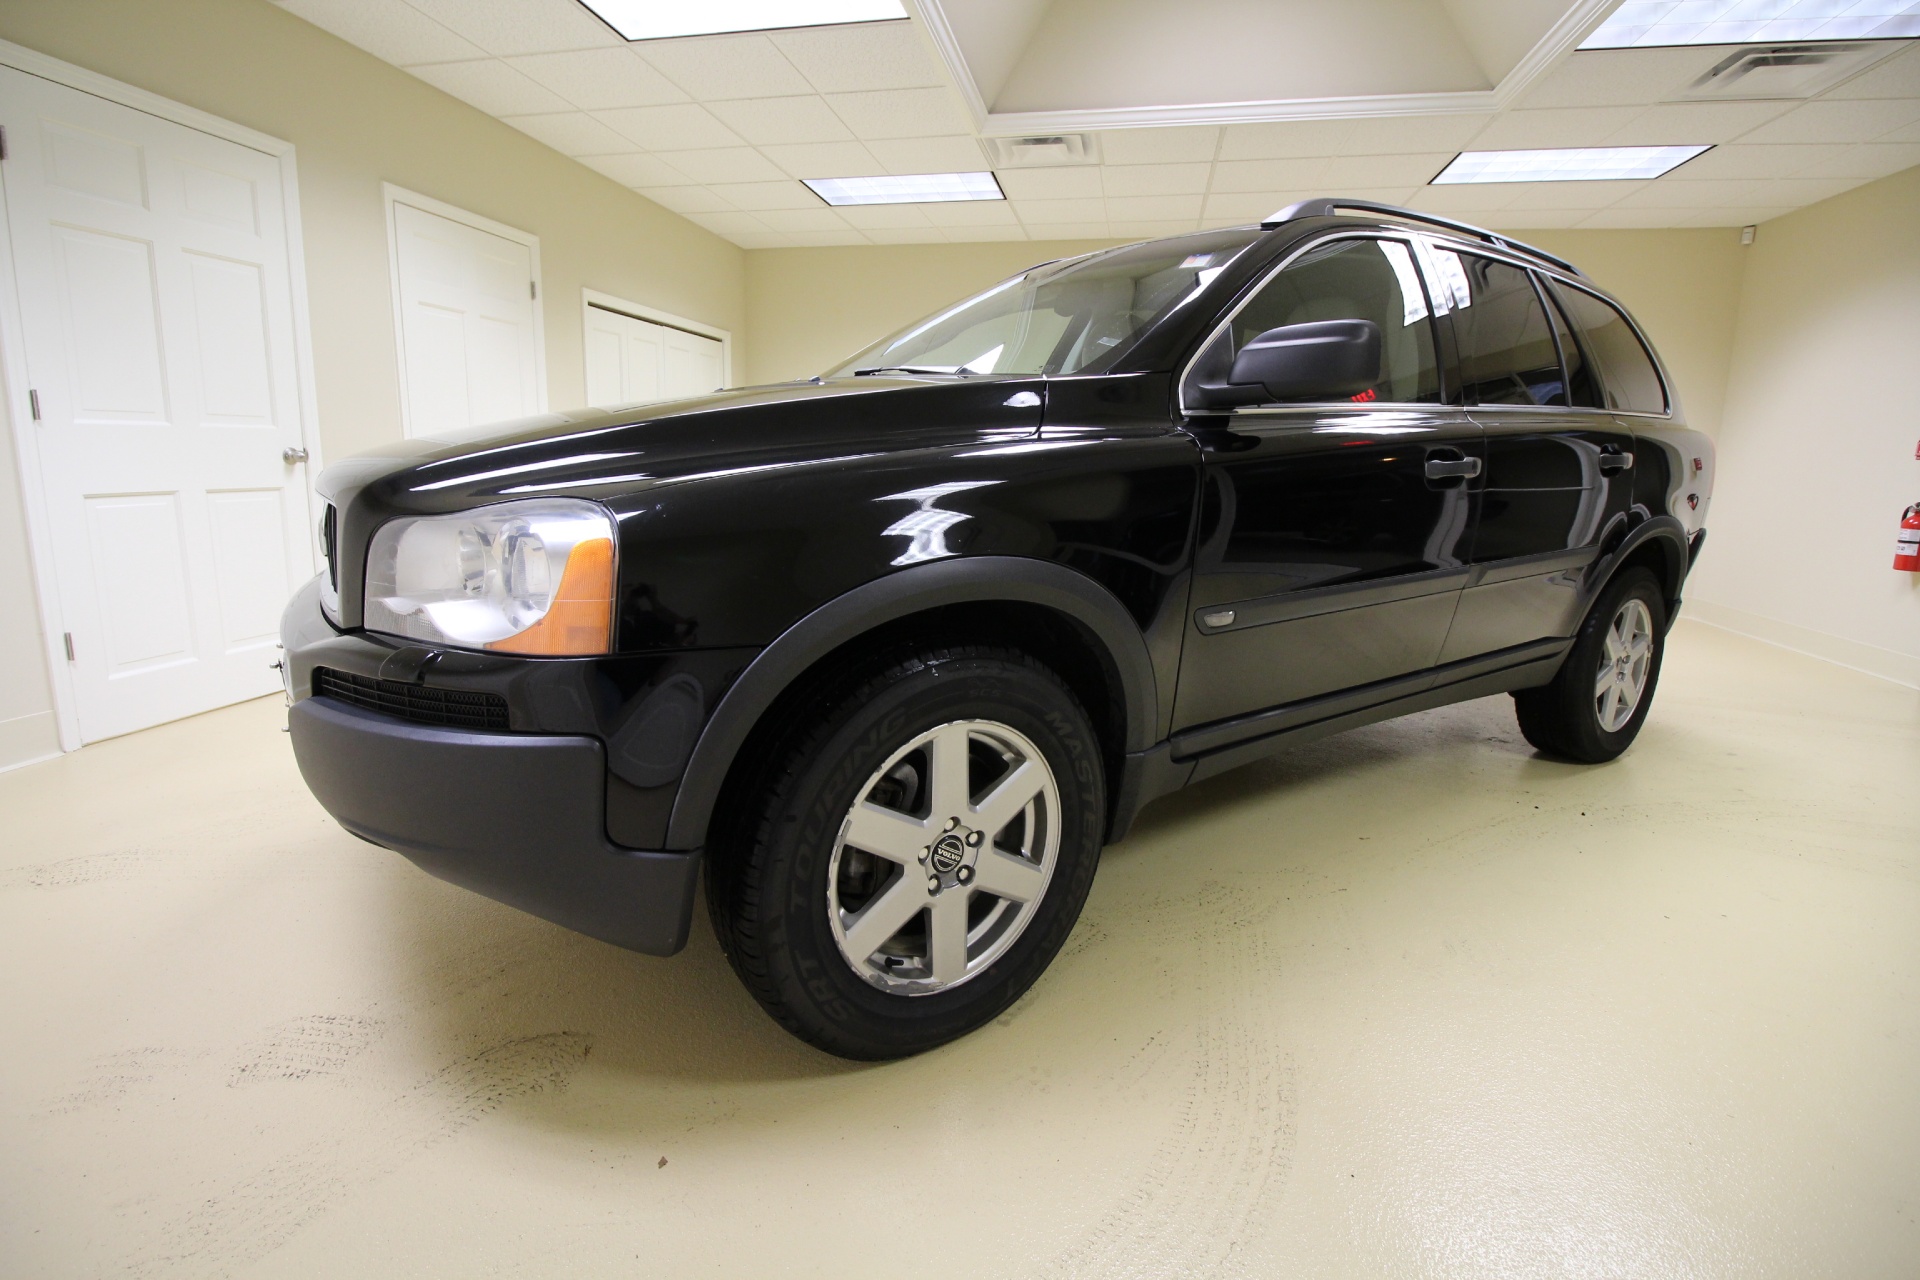 Used 2006 Black Volvo XC90 2.5T AWD LEATHER,SUNROOF,HEATED SEATS,REAR ENTERTAINMENT 2 TV'S DVD | Albany, NY